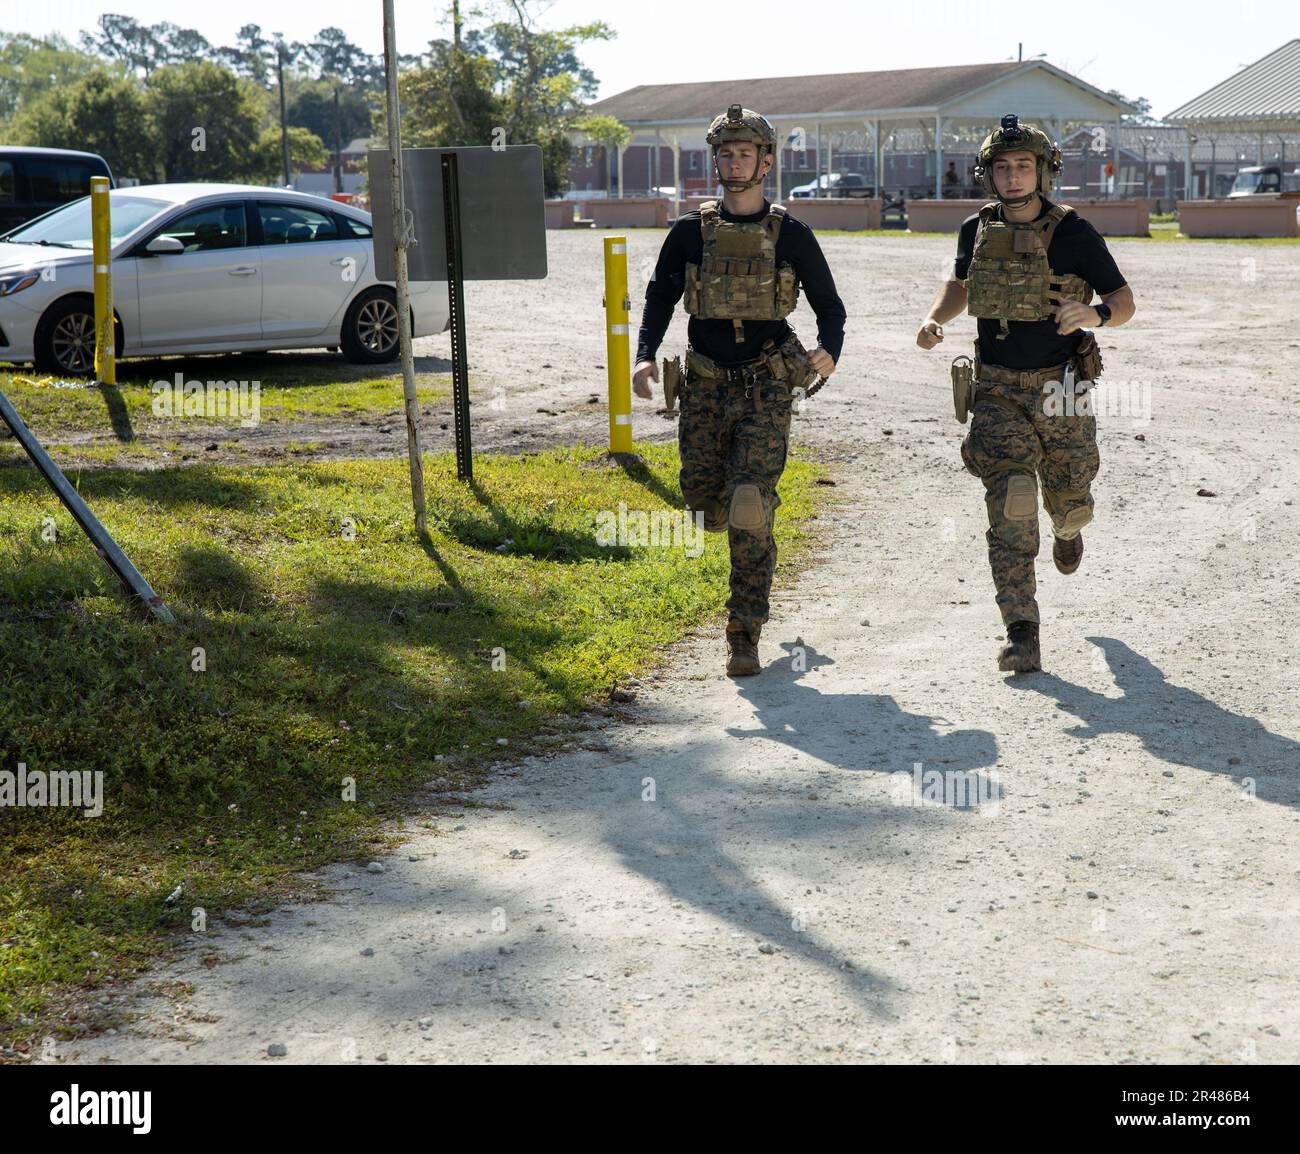 U.S Marine Corps urban sniper instructor (left) and Staff Sgt. Santore Francis (right) urban sniper instructors with Expeditionary Operations Training Group (EOTG), II Marine Expeditionary Force, run during the Sniper Sustainment Course (SSC) aboard Marine Corps Base Camp Lejeune, North Carolina, April 5, 2023. The SSC provides the opportunity for the Special Tactics Branch of EOTG to restructure the Urban Sniper Course to better suit the needs of the Recon Snipers that will remain in service for the Marine Corps and to conduct advanced marksmanship training to validate the standards for futur Stock Photo